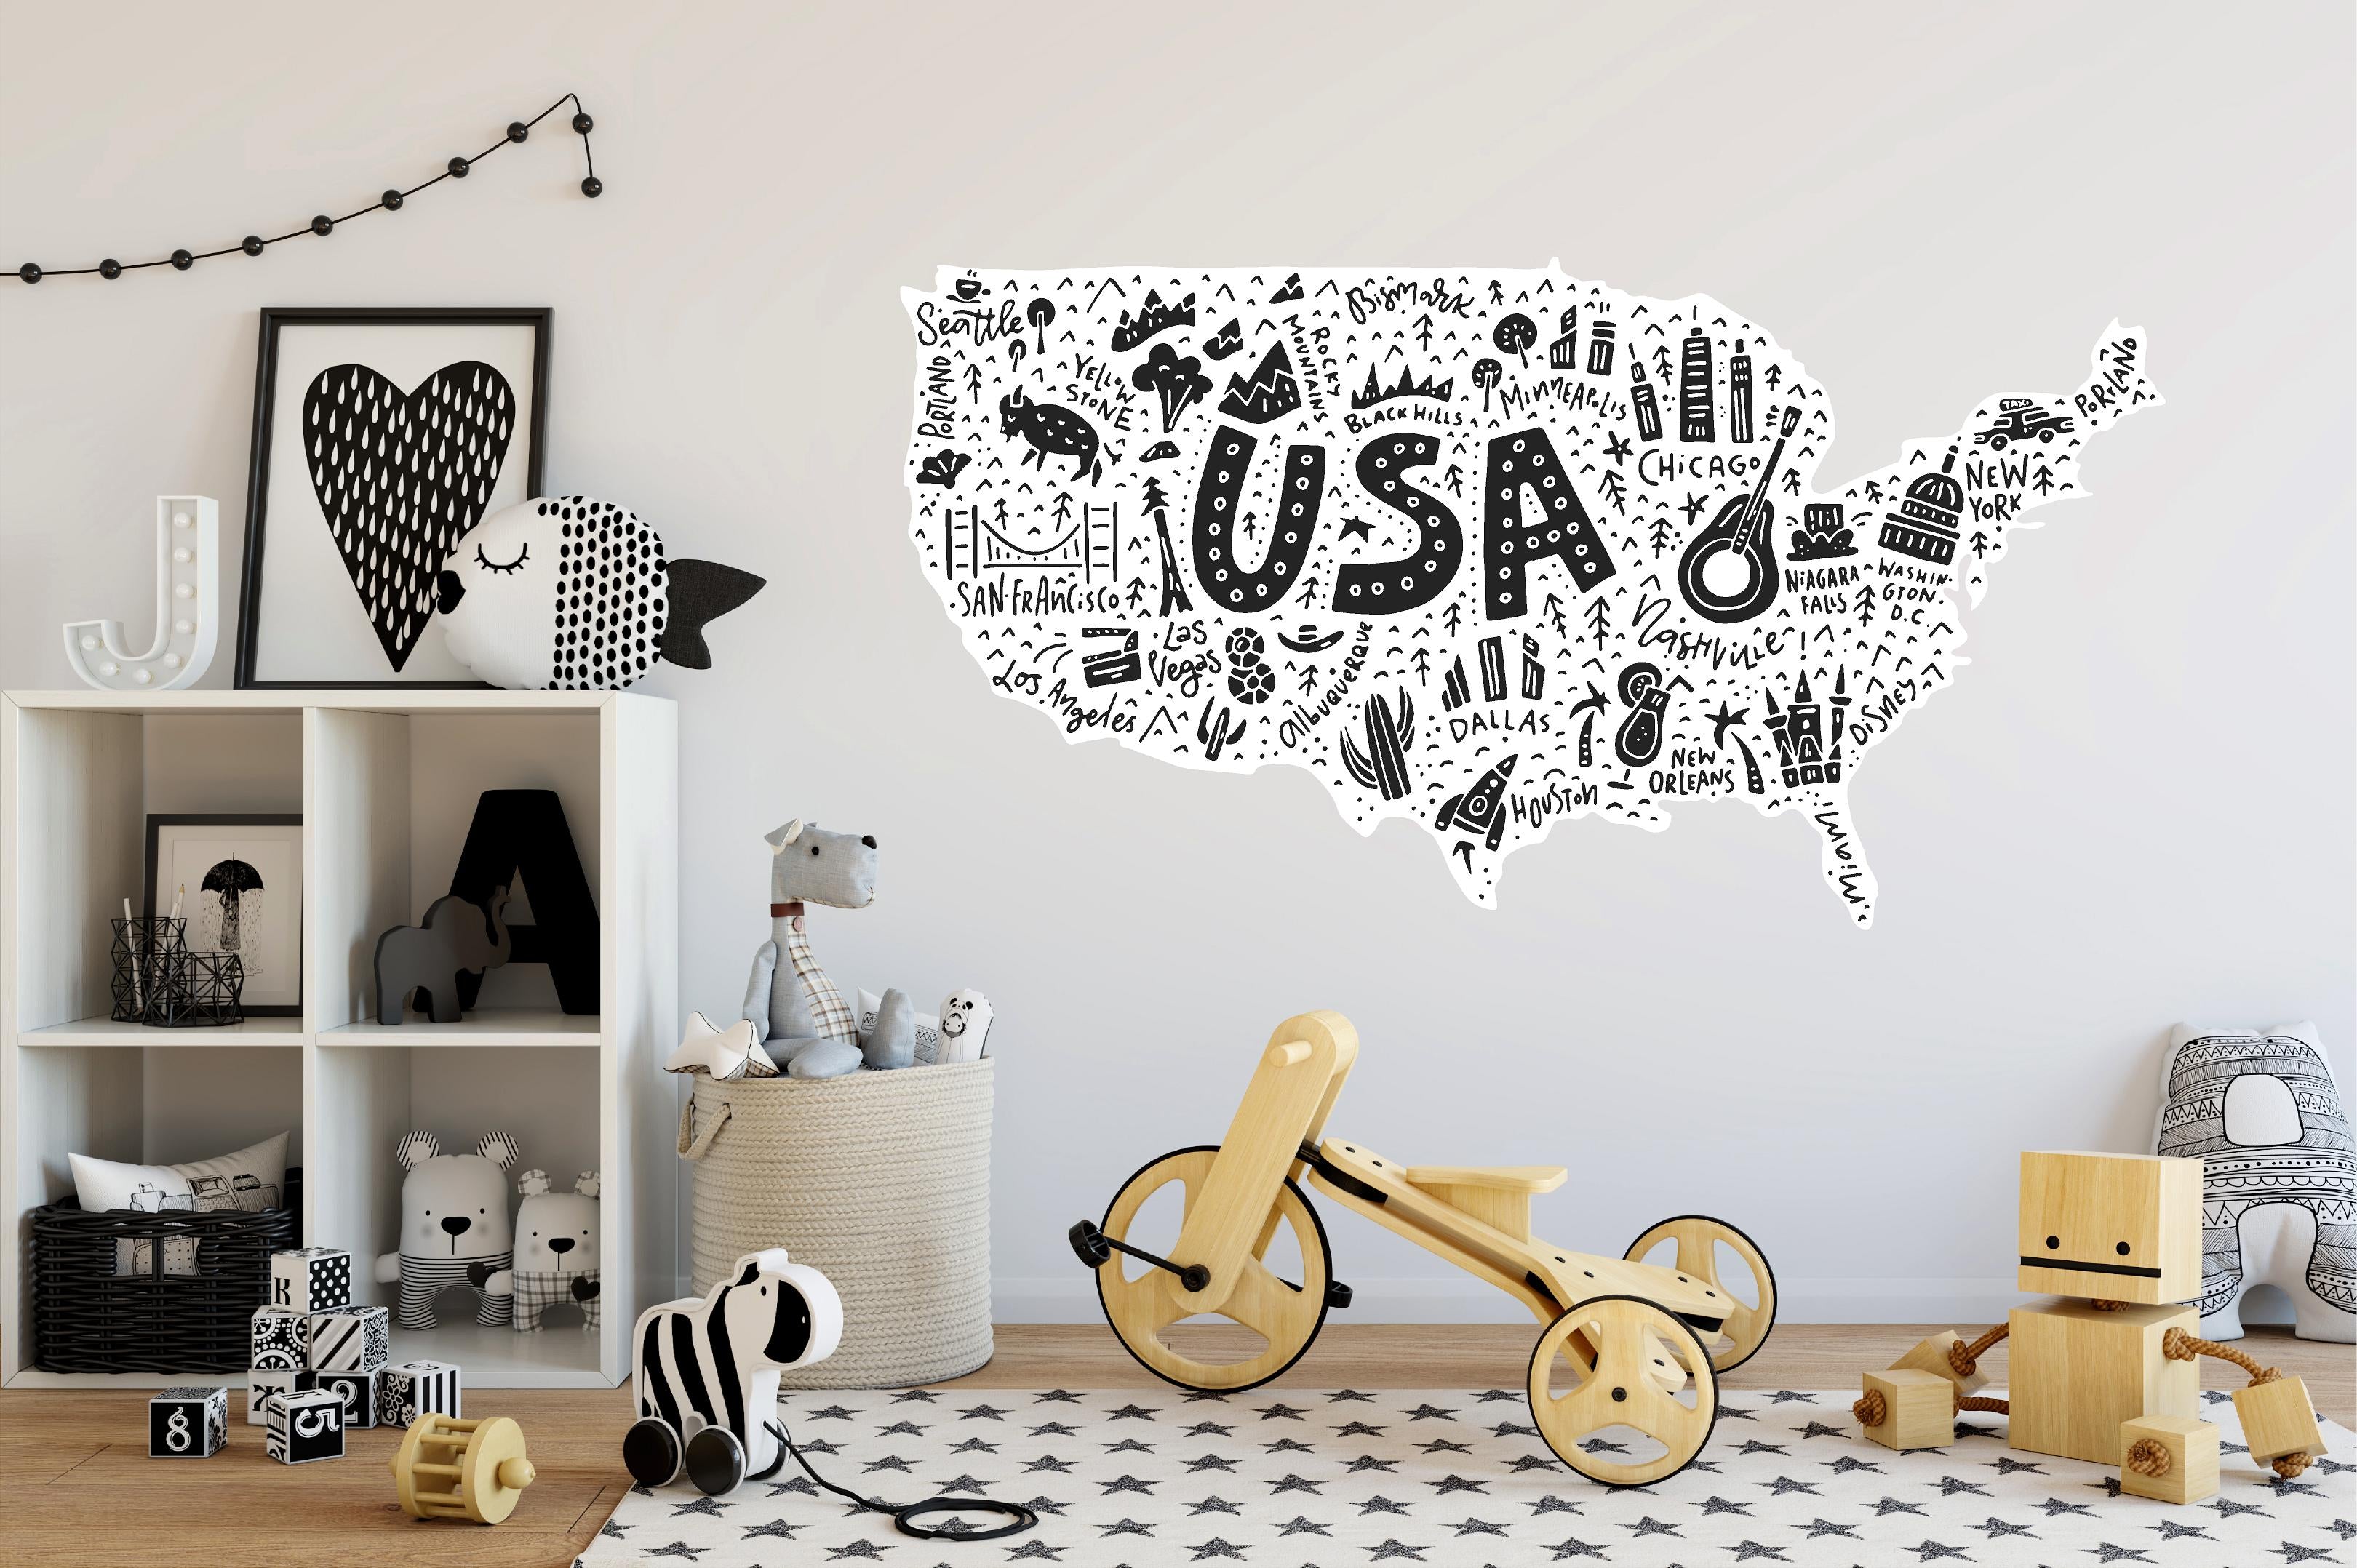 United States USA Cartoon Map #3 Wall Decal Removable Fabric Wall Sticker | DecalBaby